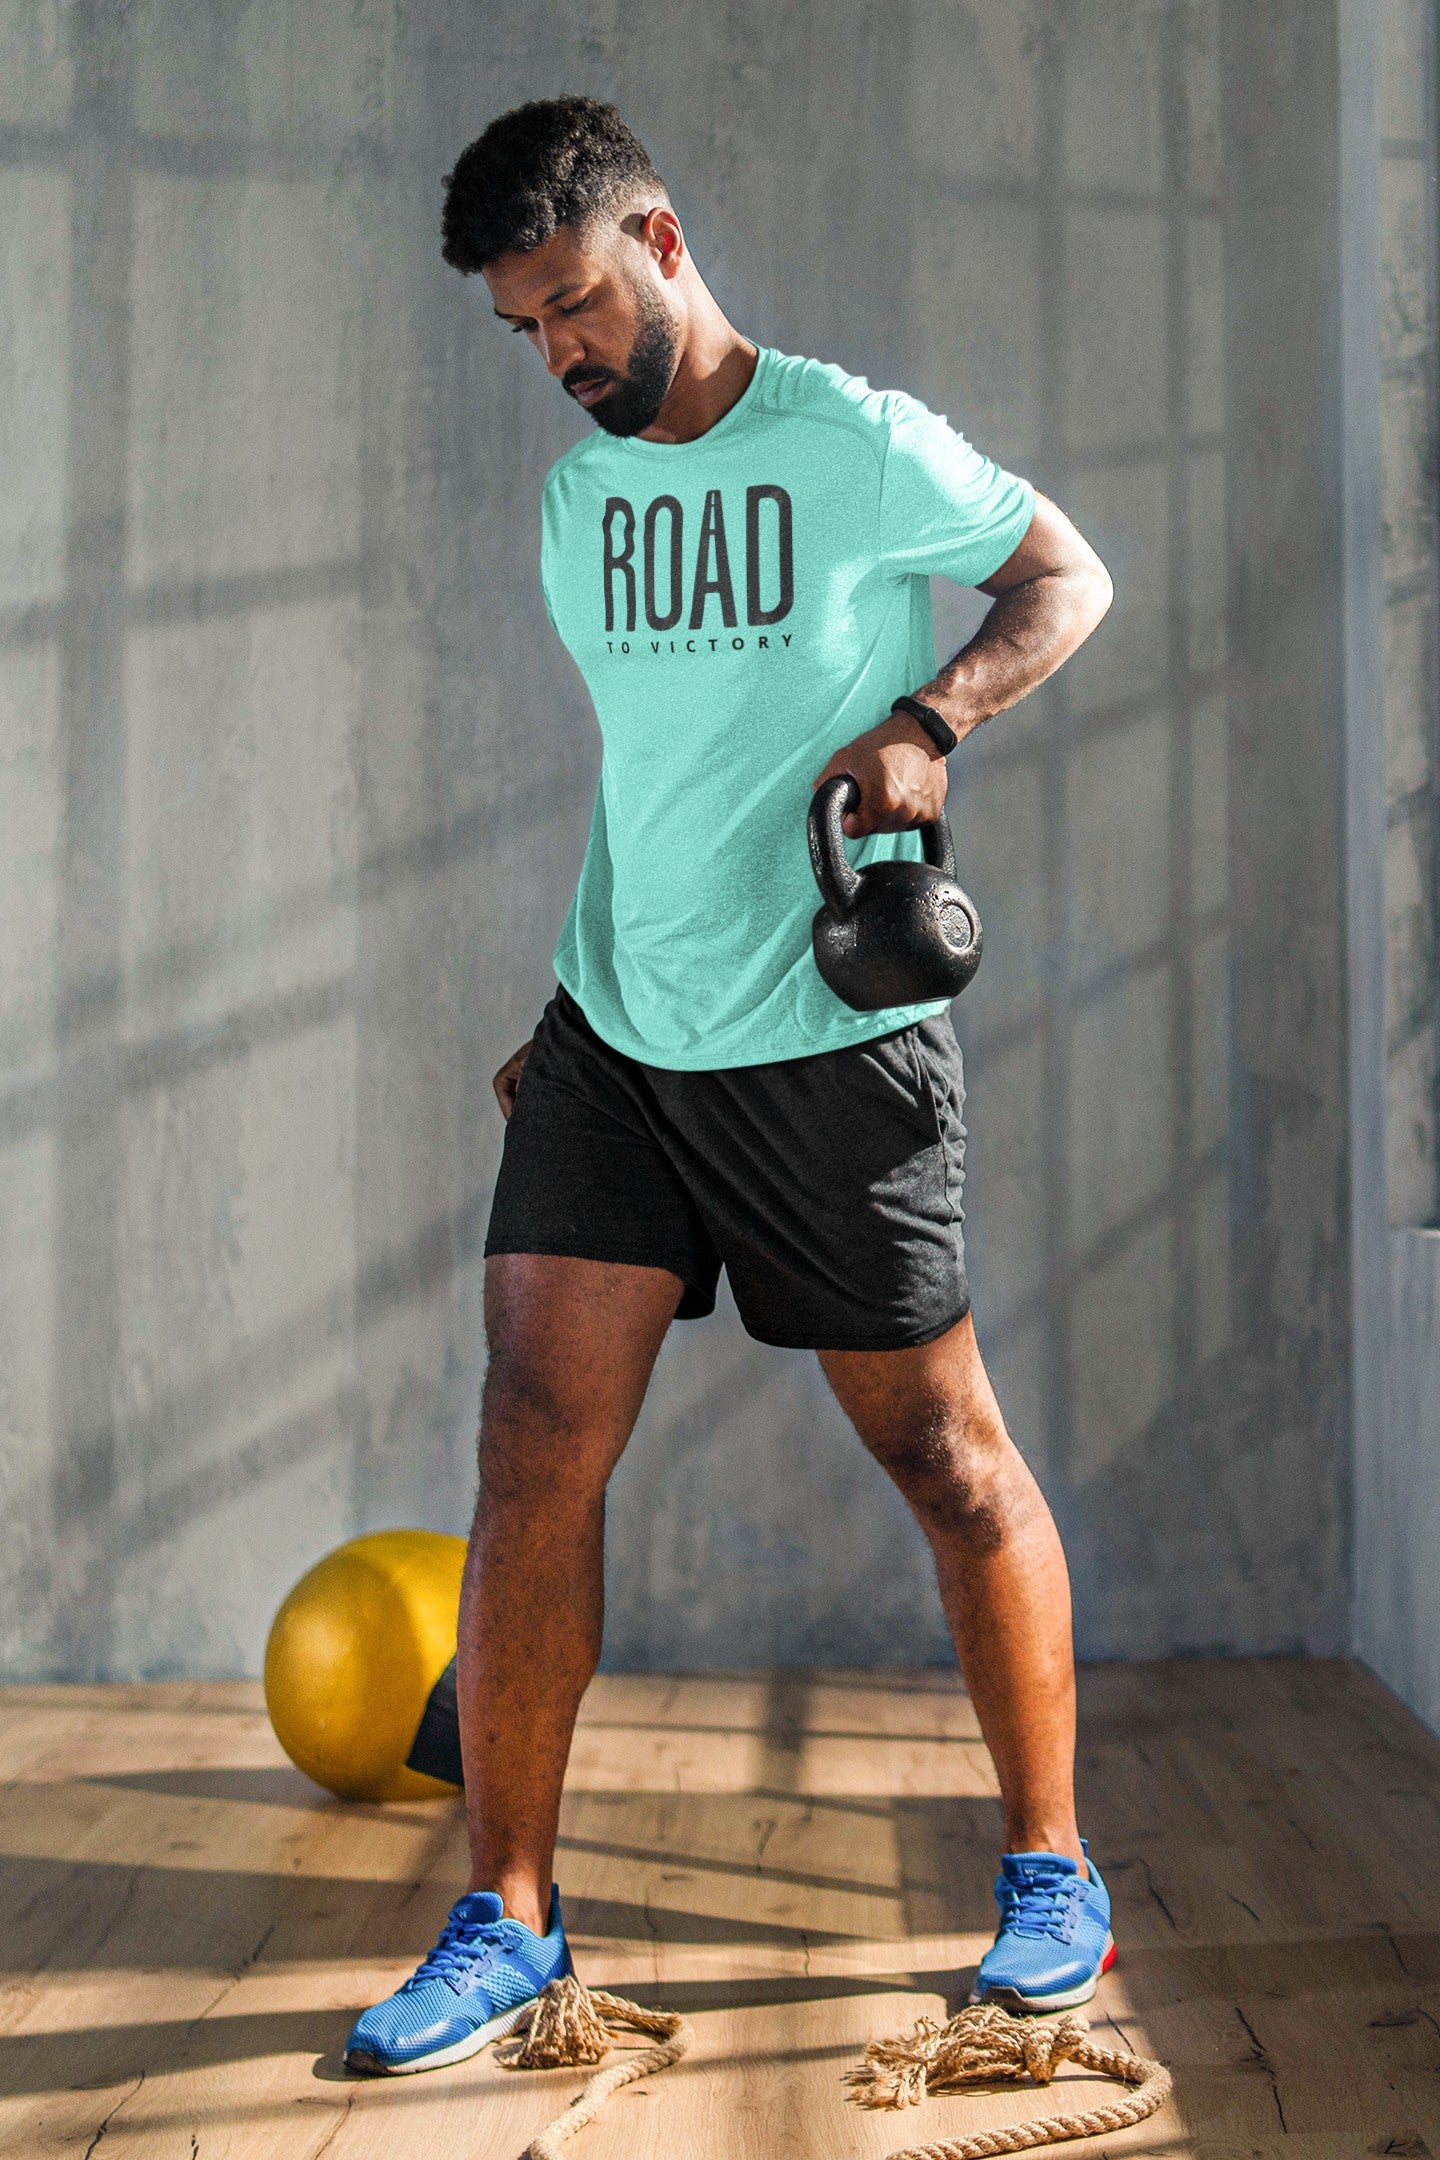 Gym T Shirt - On A Road To Victory with premium cotton Lycra. The Sports T Shirt by Strong Soul